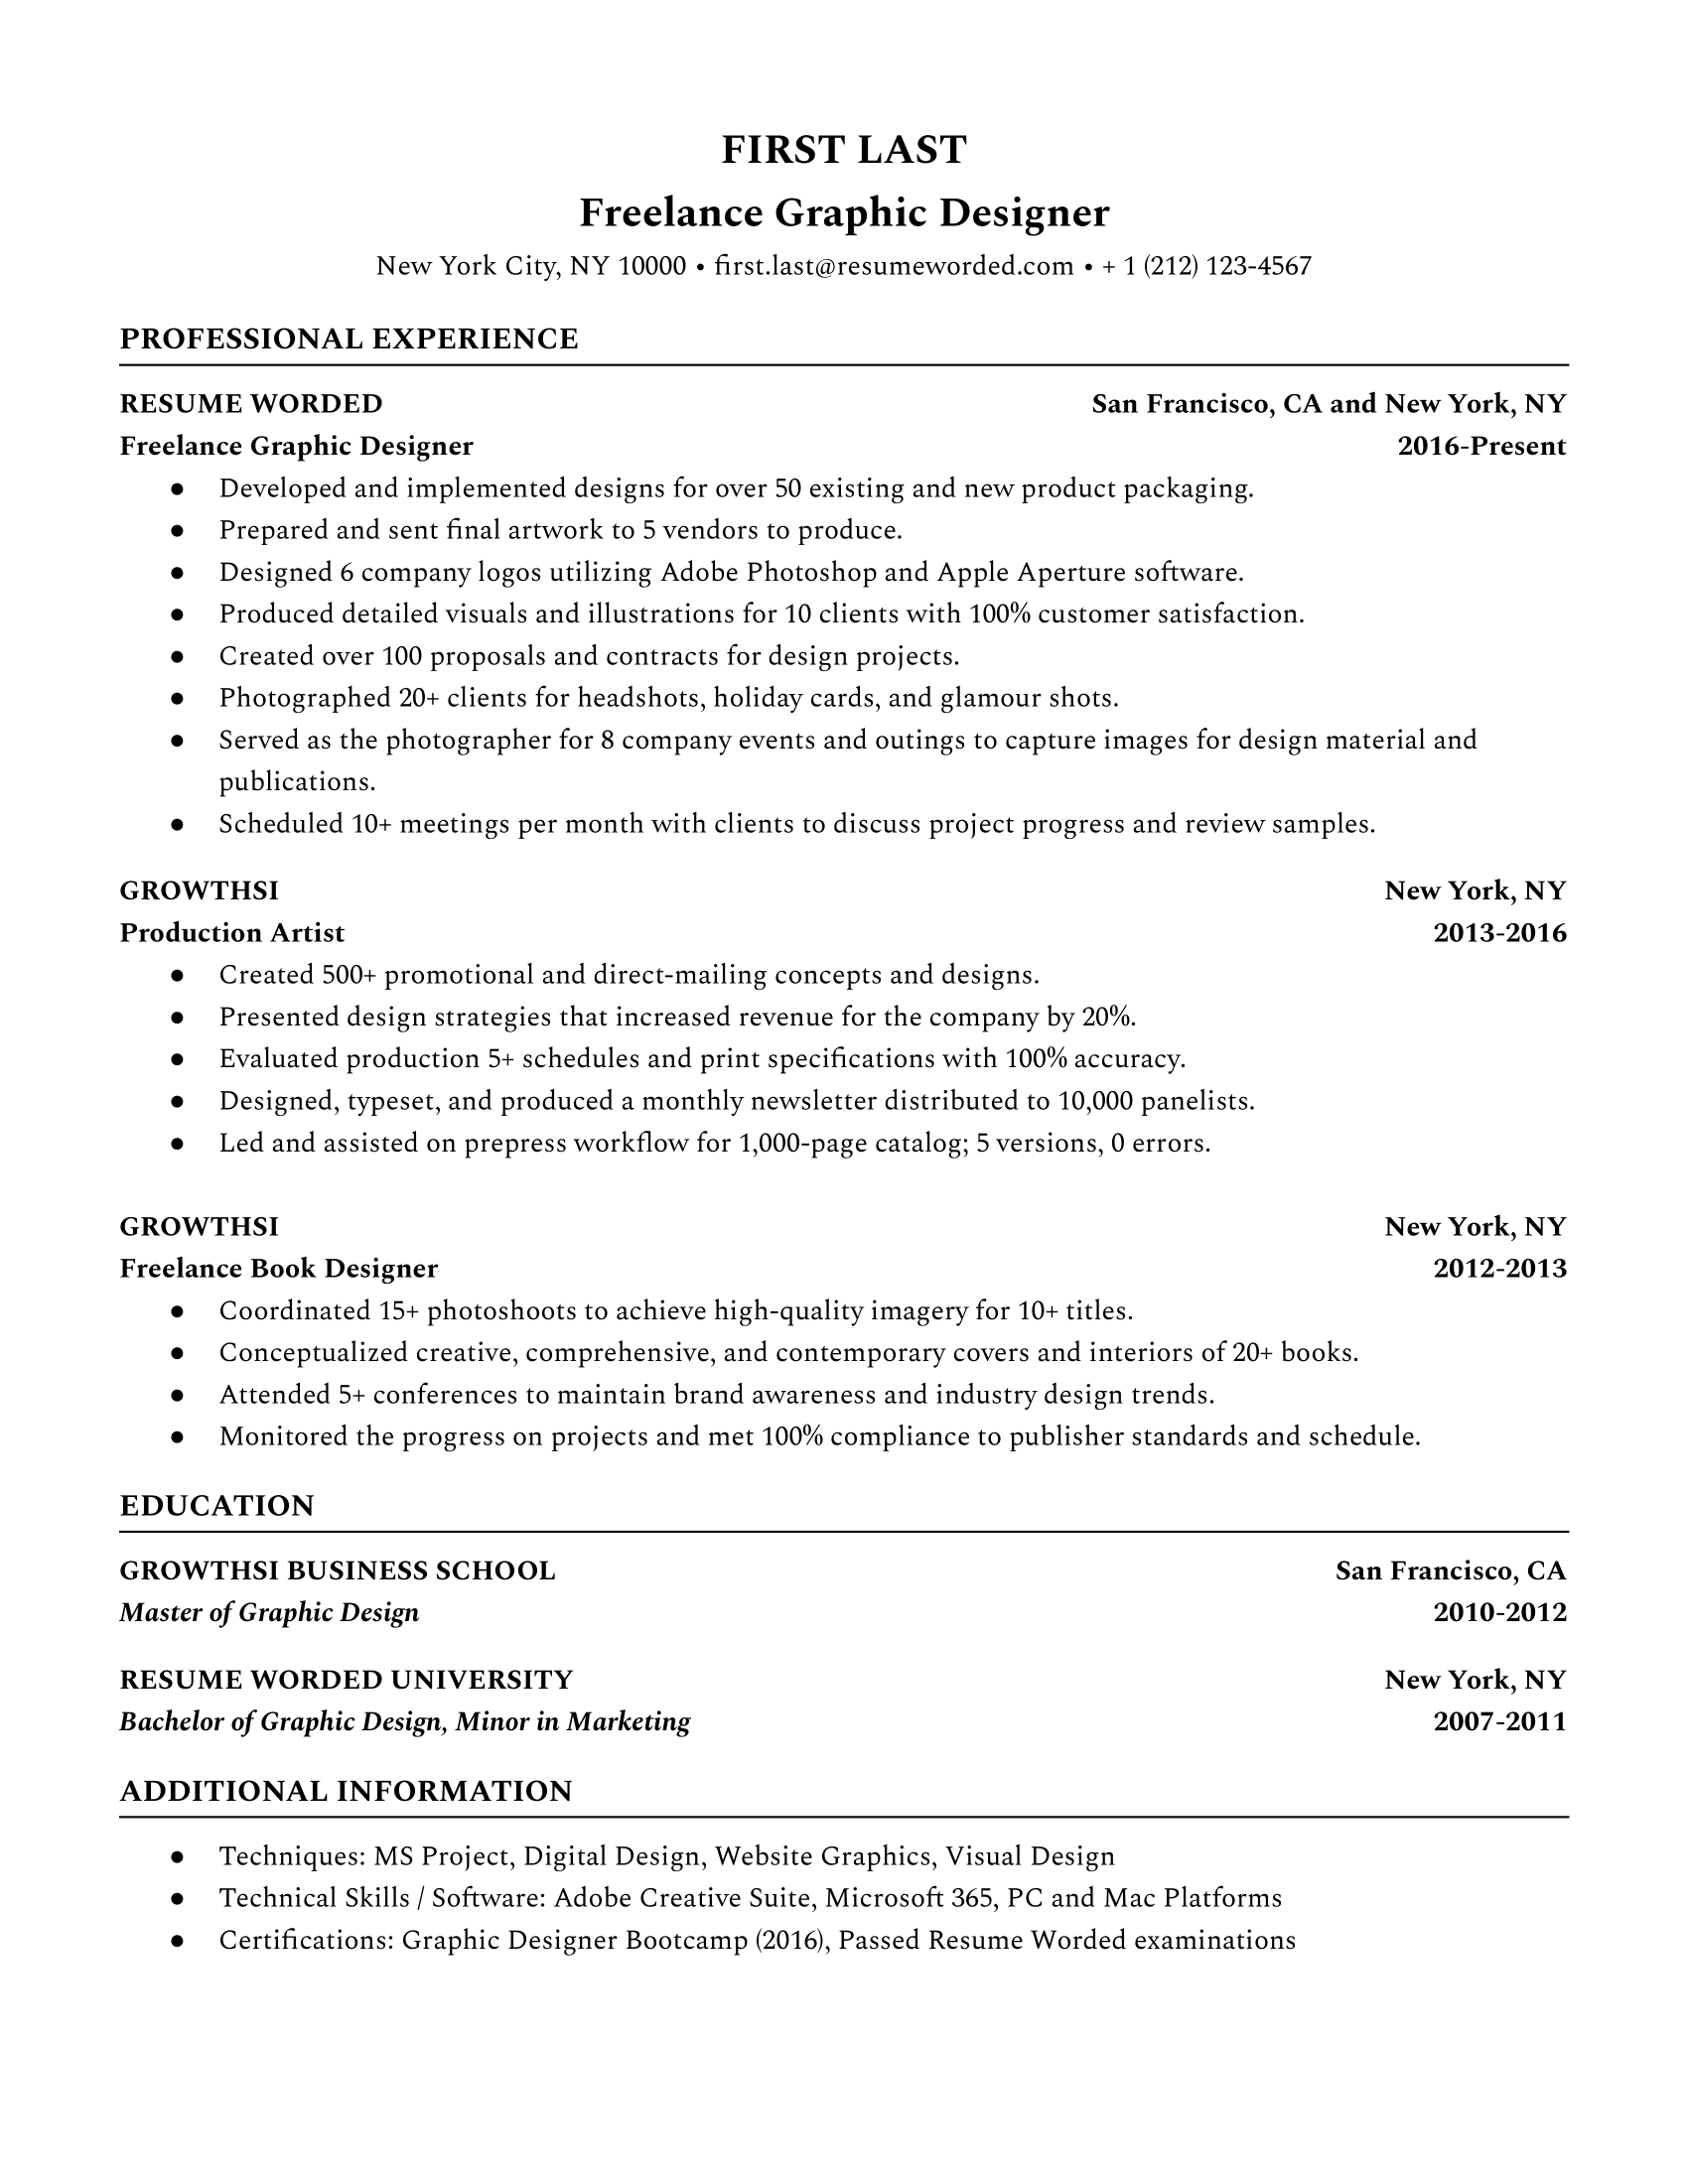 Freelance graphic designer resume template example with work experience listed by specific project